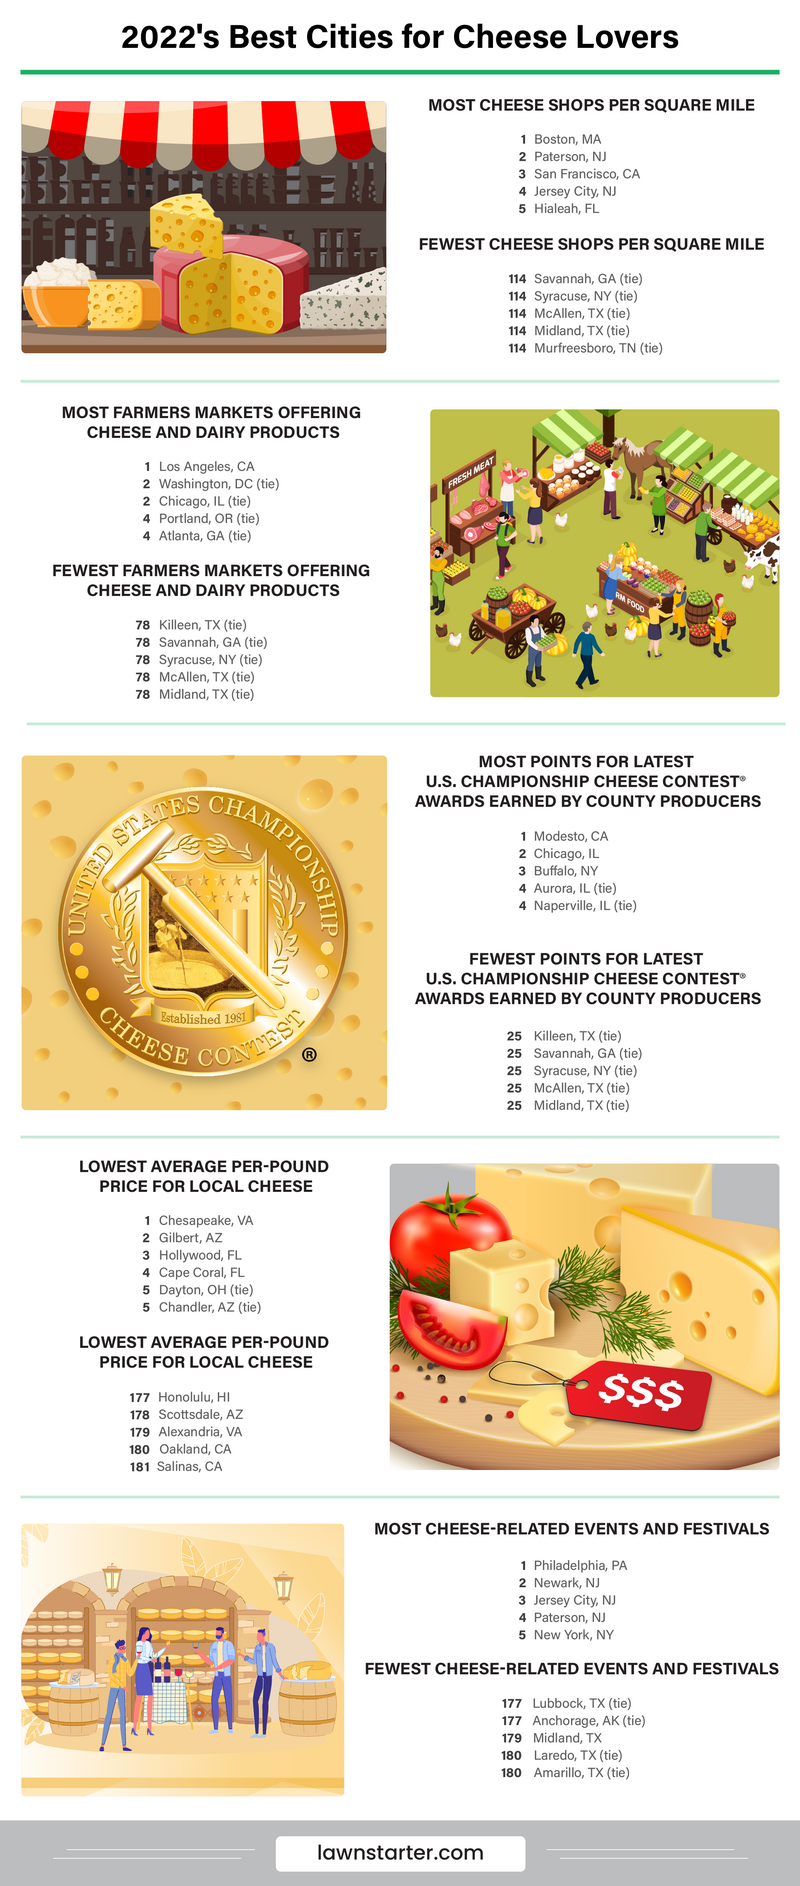 infographic of 2022's Best Cities for Cheese Lovers